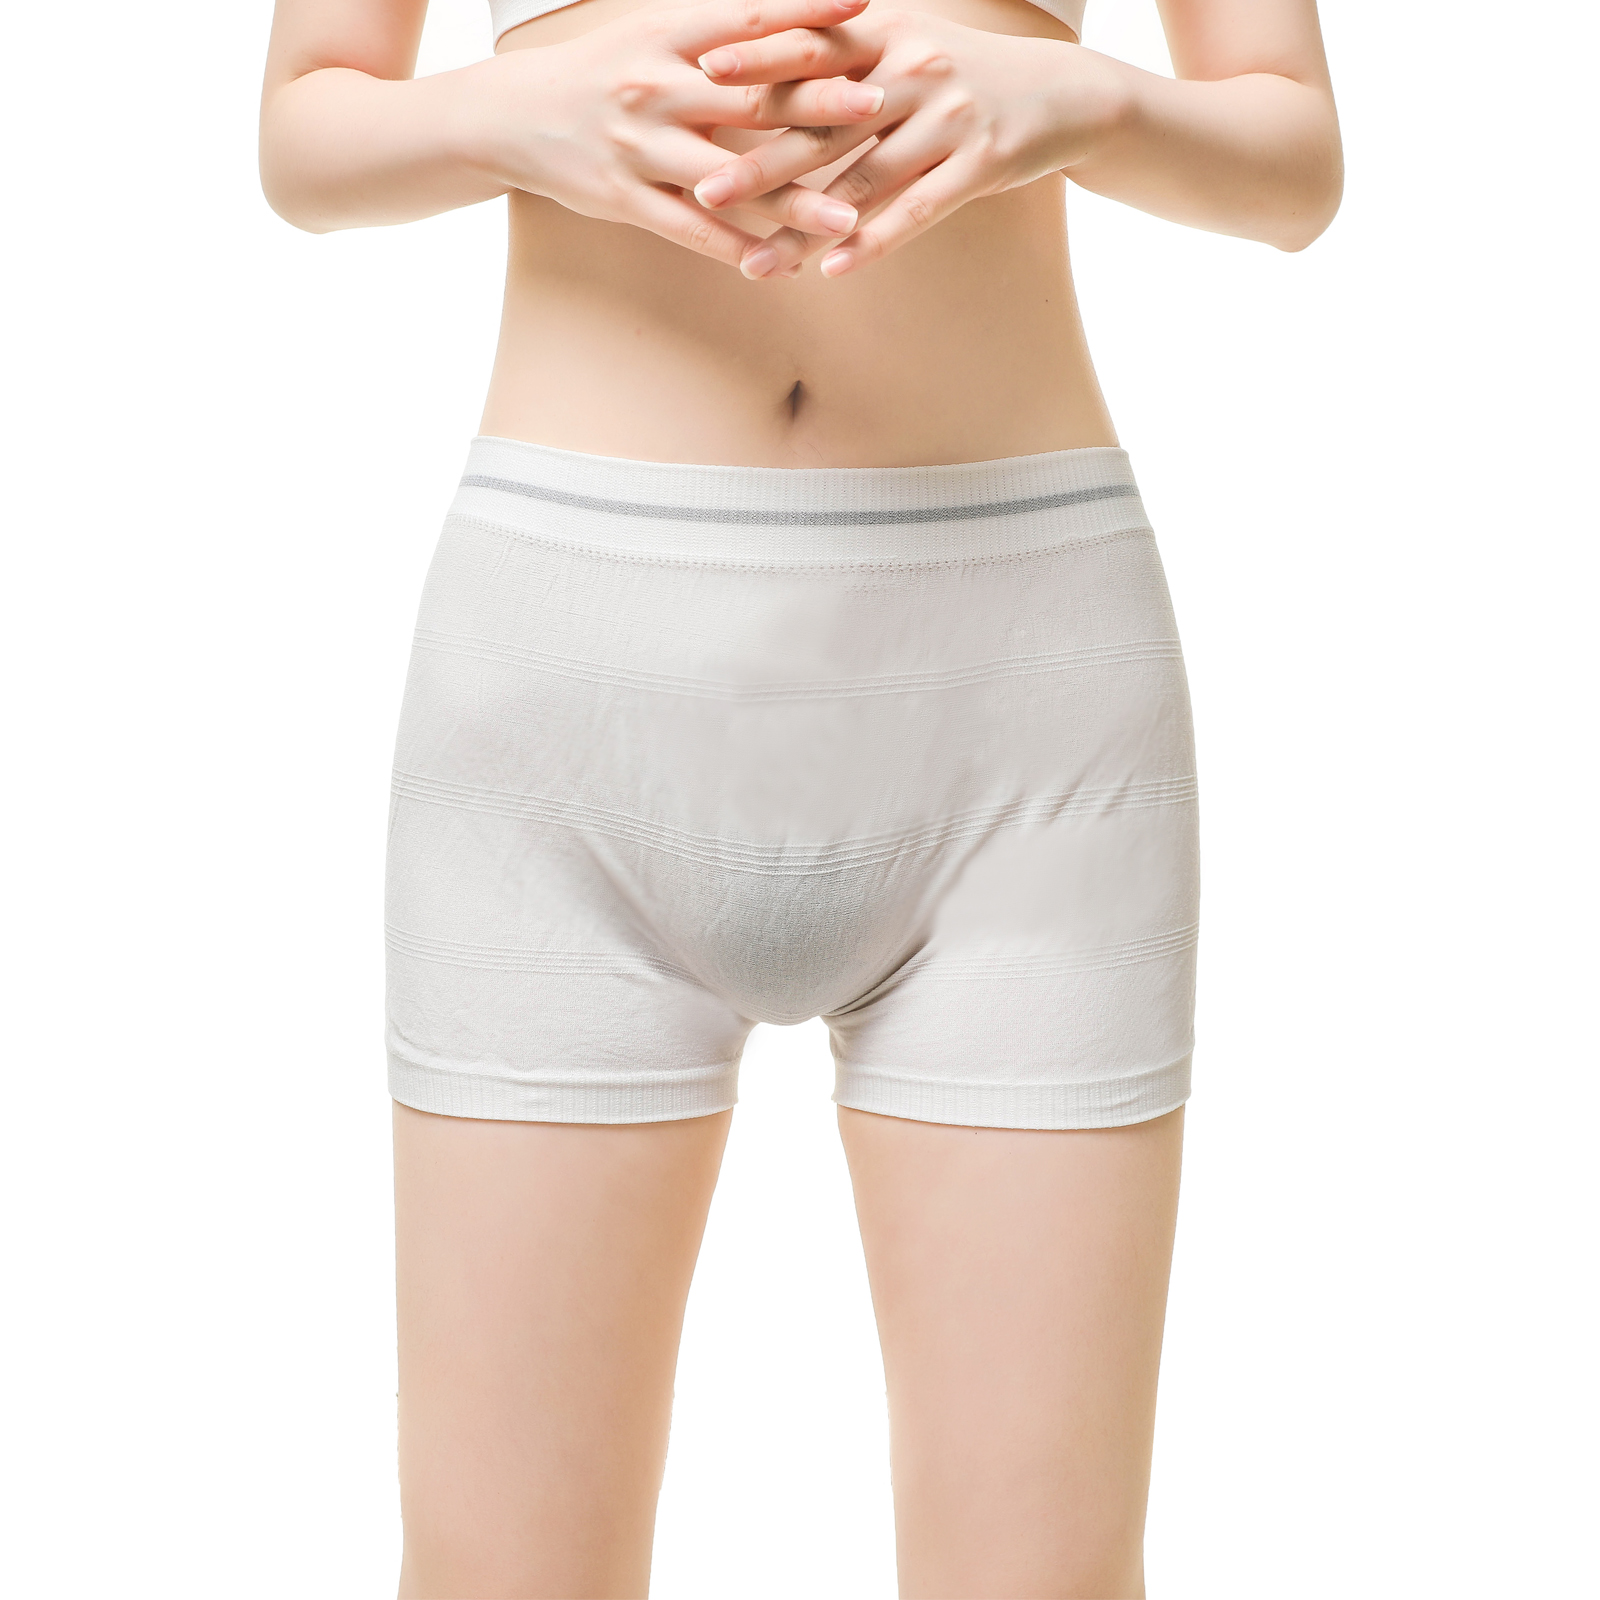 High Quality Washable and Reusable Adult Incontinence Underwear Fixation Pants